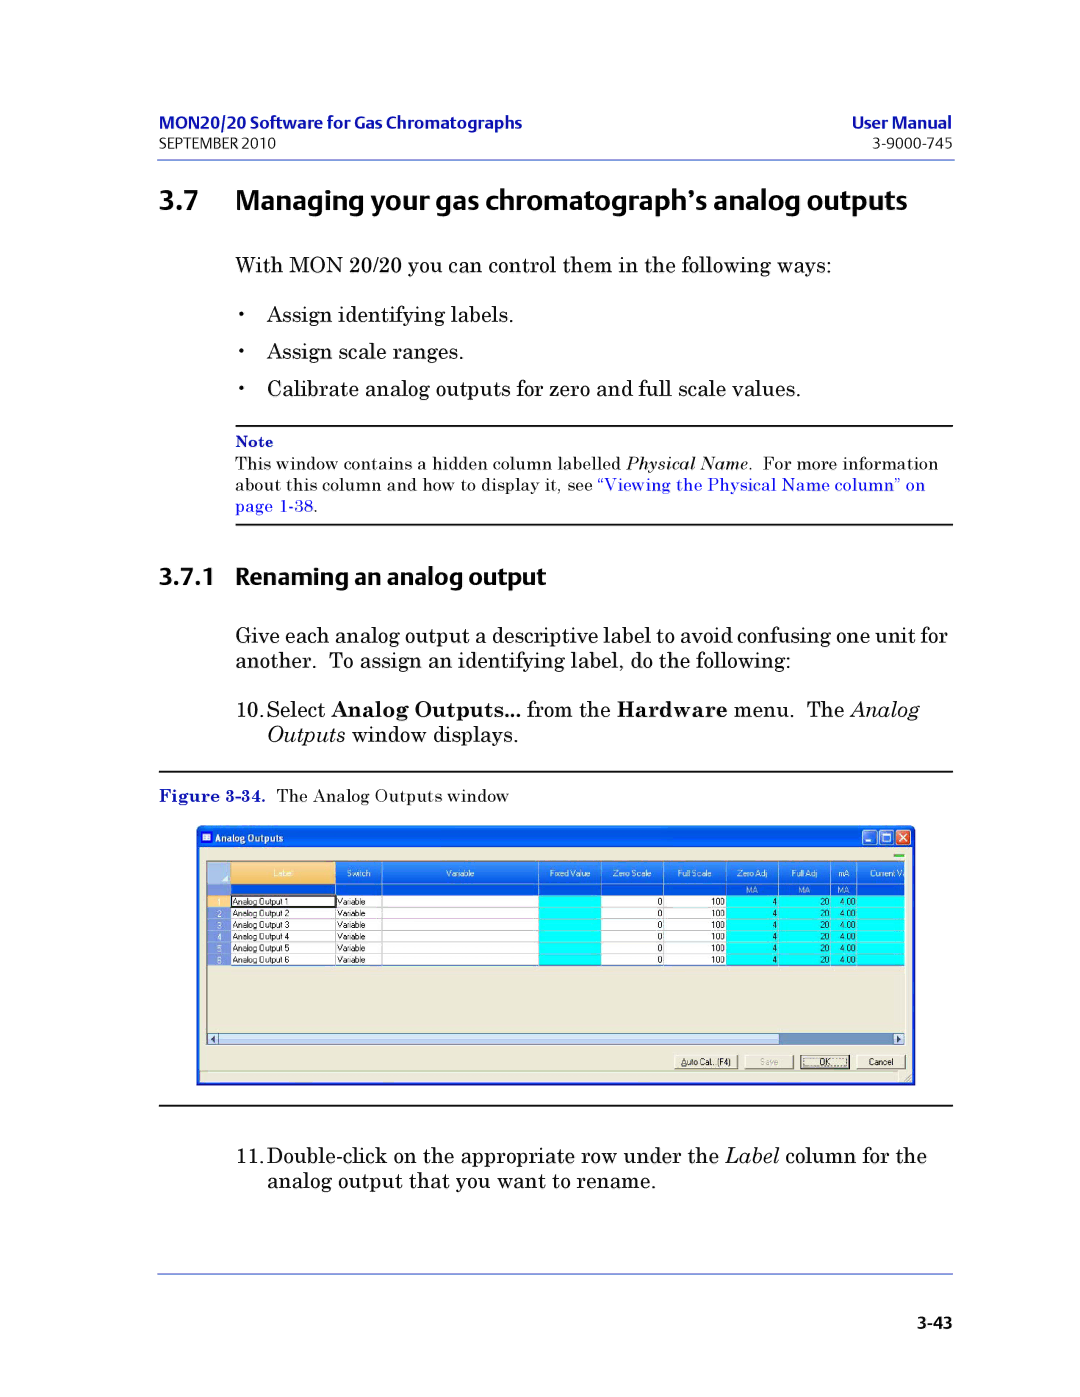 Emerson Process Management 3-9000-745 manual Managing your gas chromatograph’s analog outputs, Renaming an analog output 